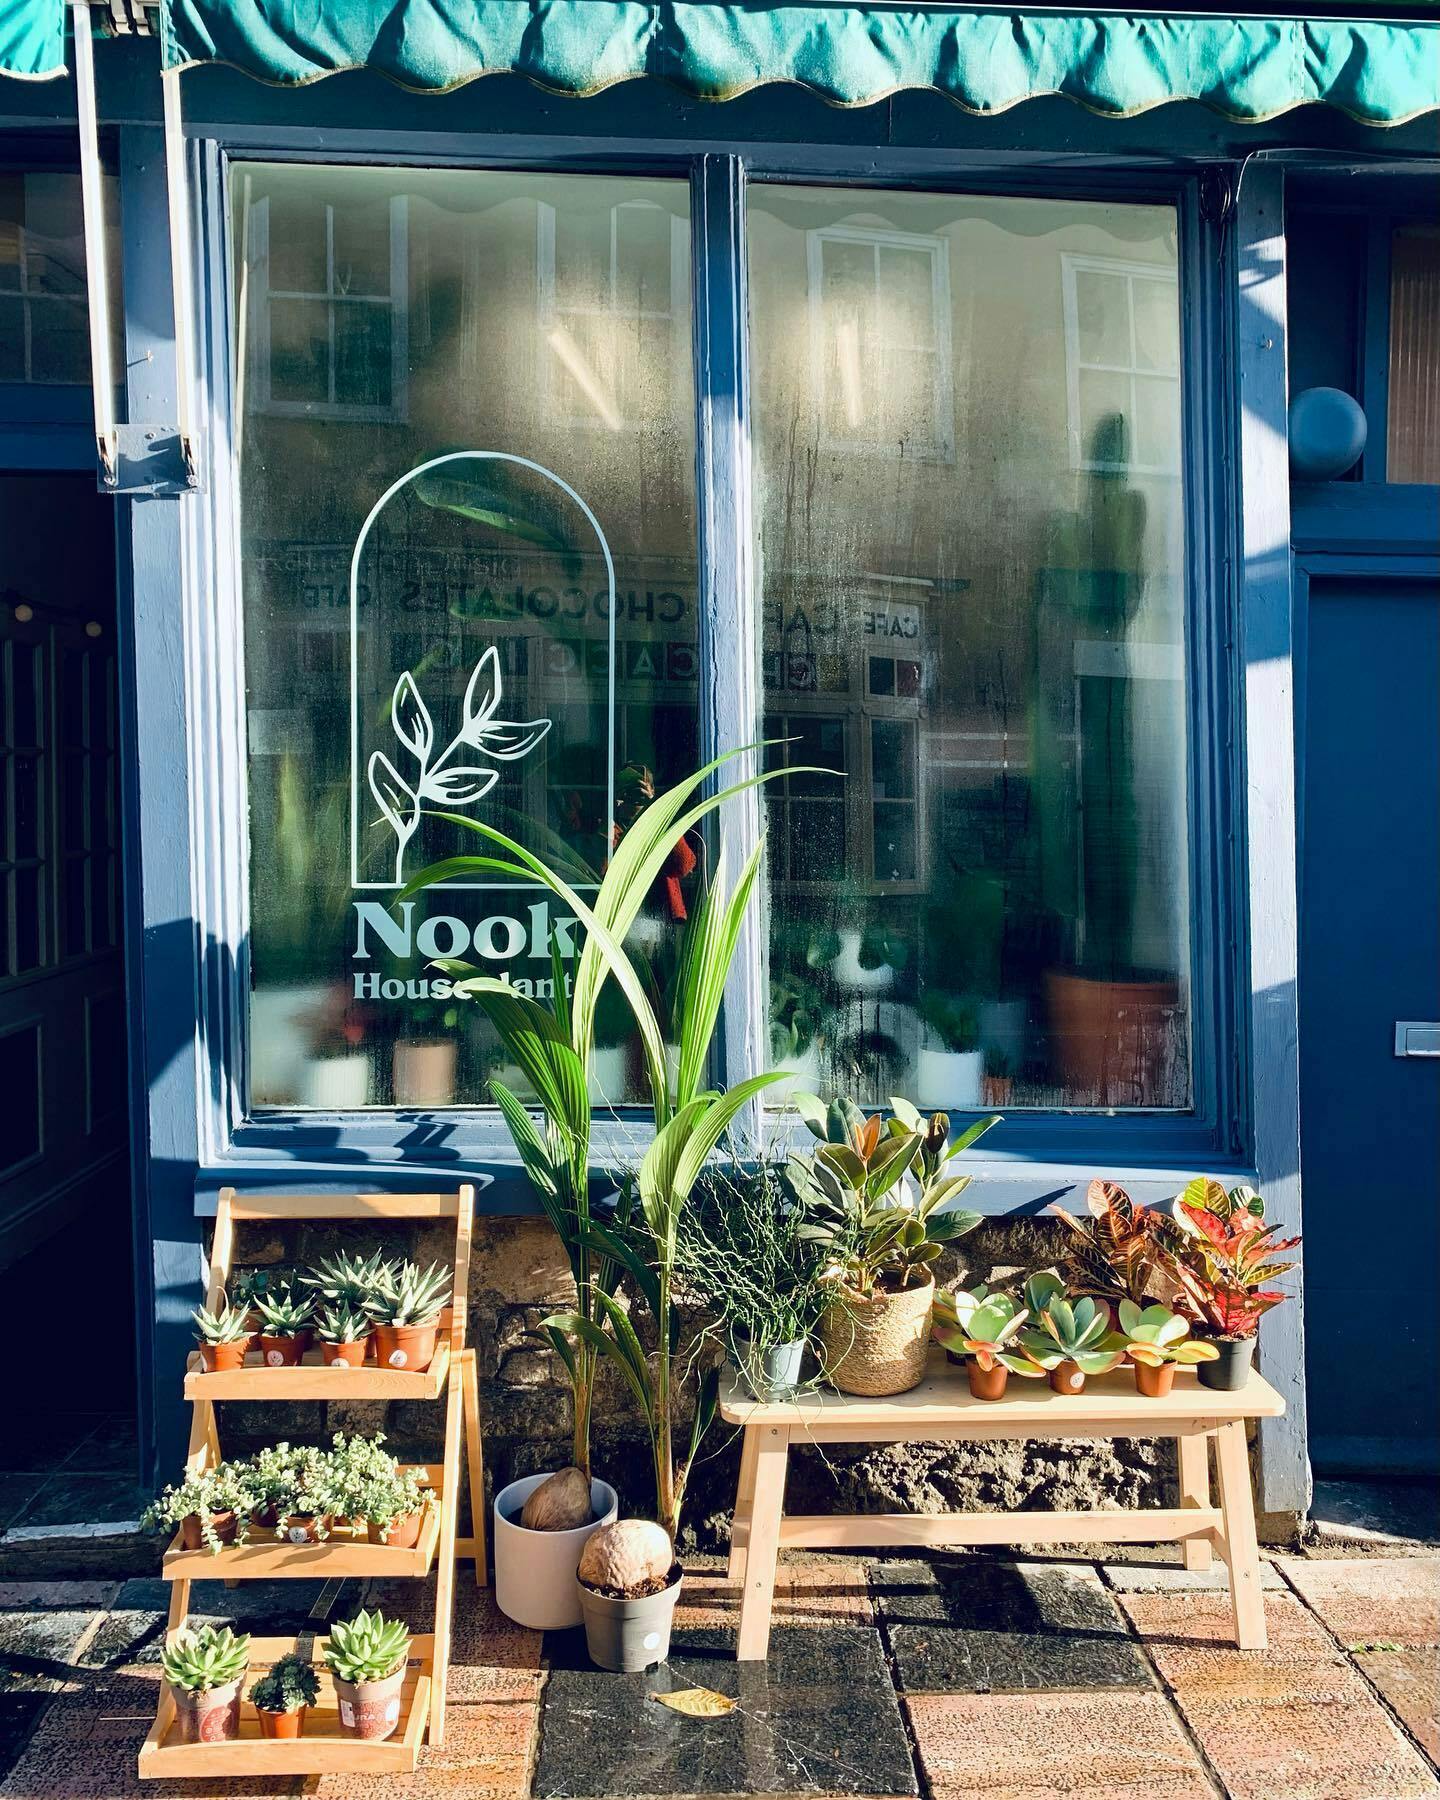 Exterior shot of Nook Houseplants, with steamed up windows, plants on display and logo proud in the window